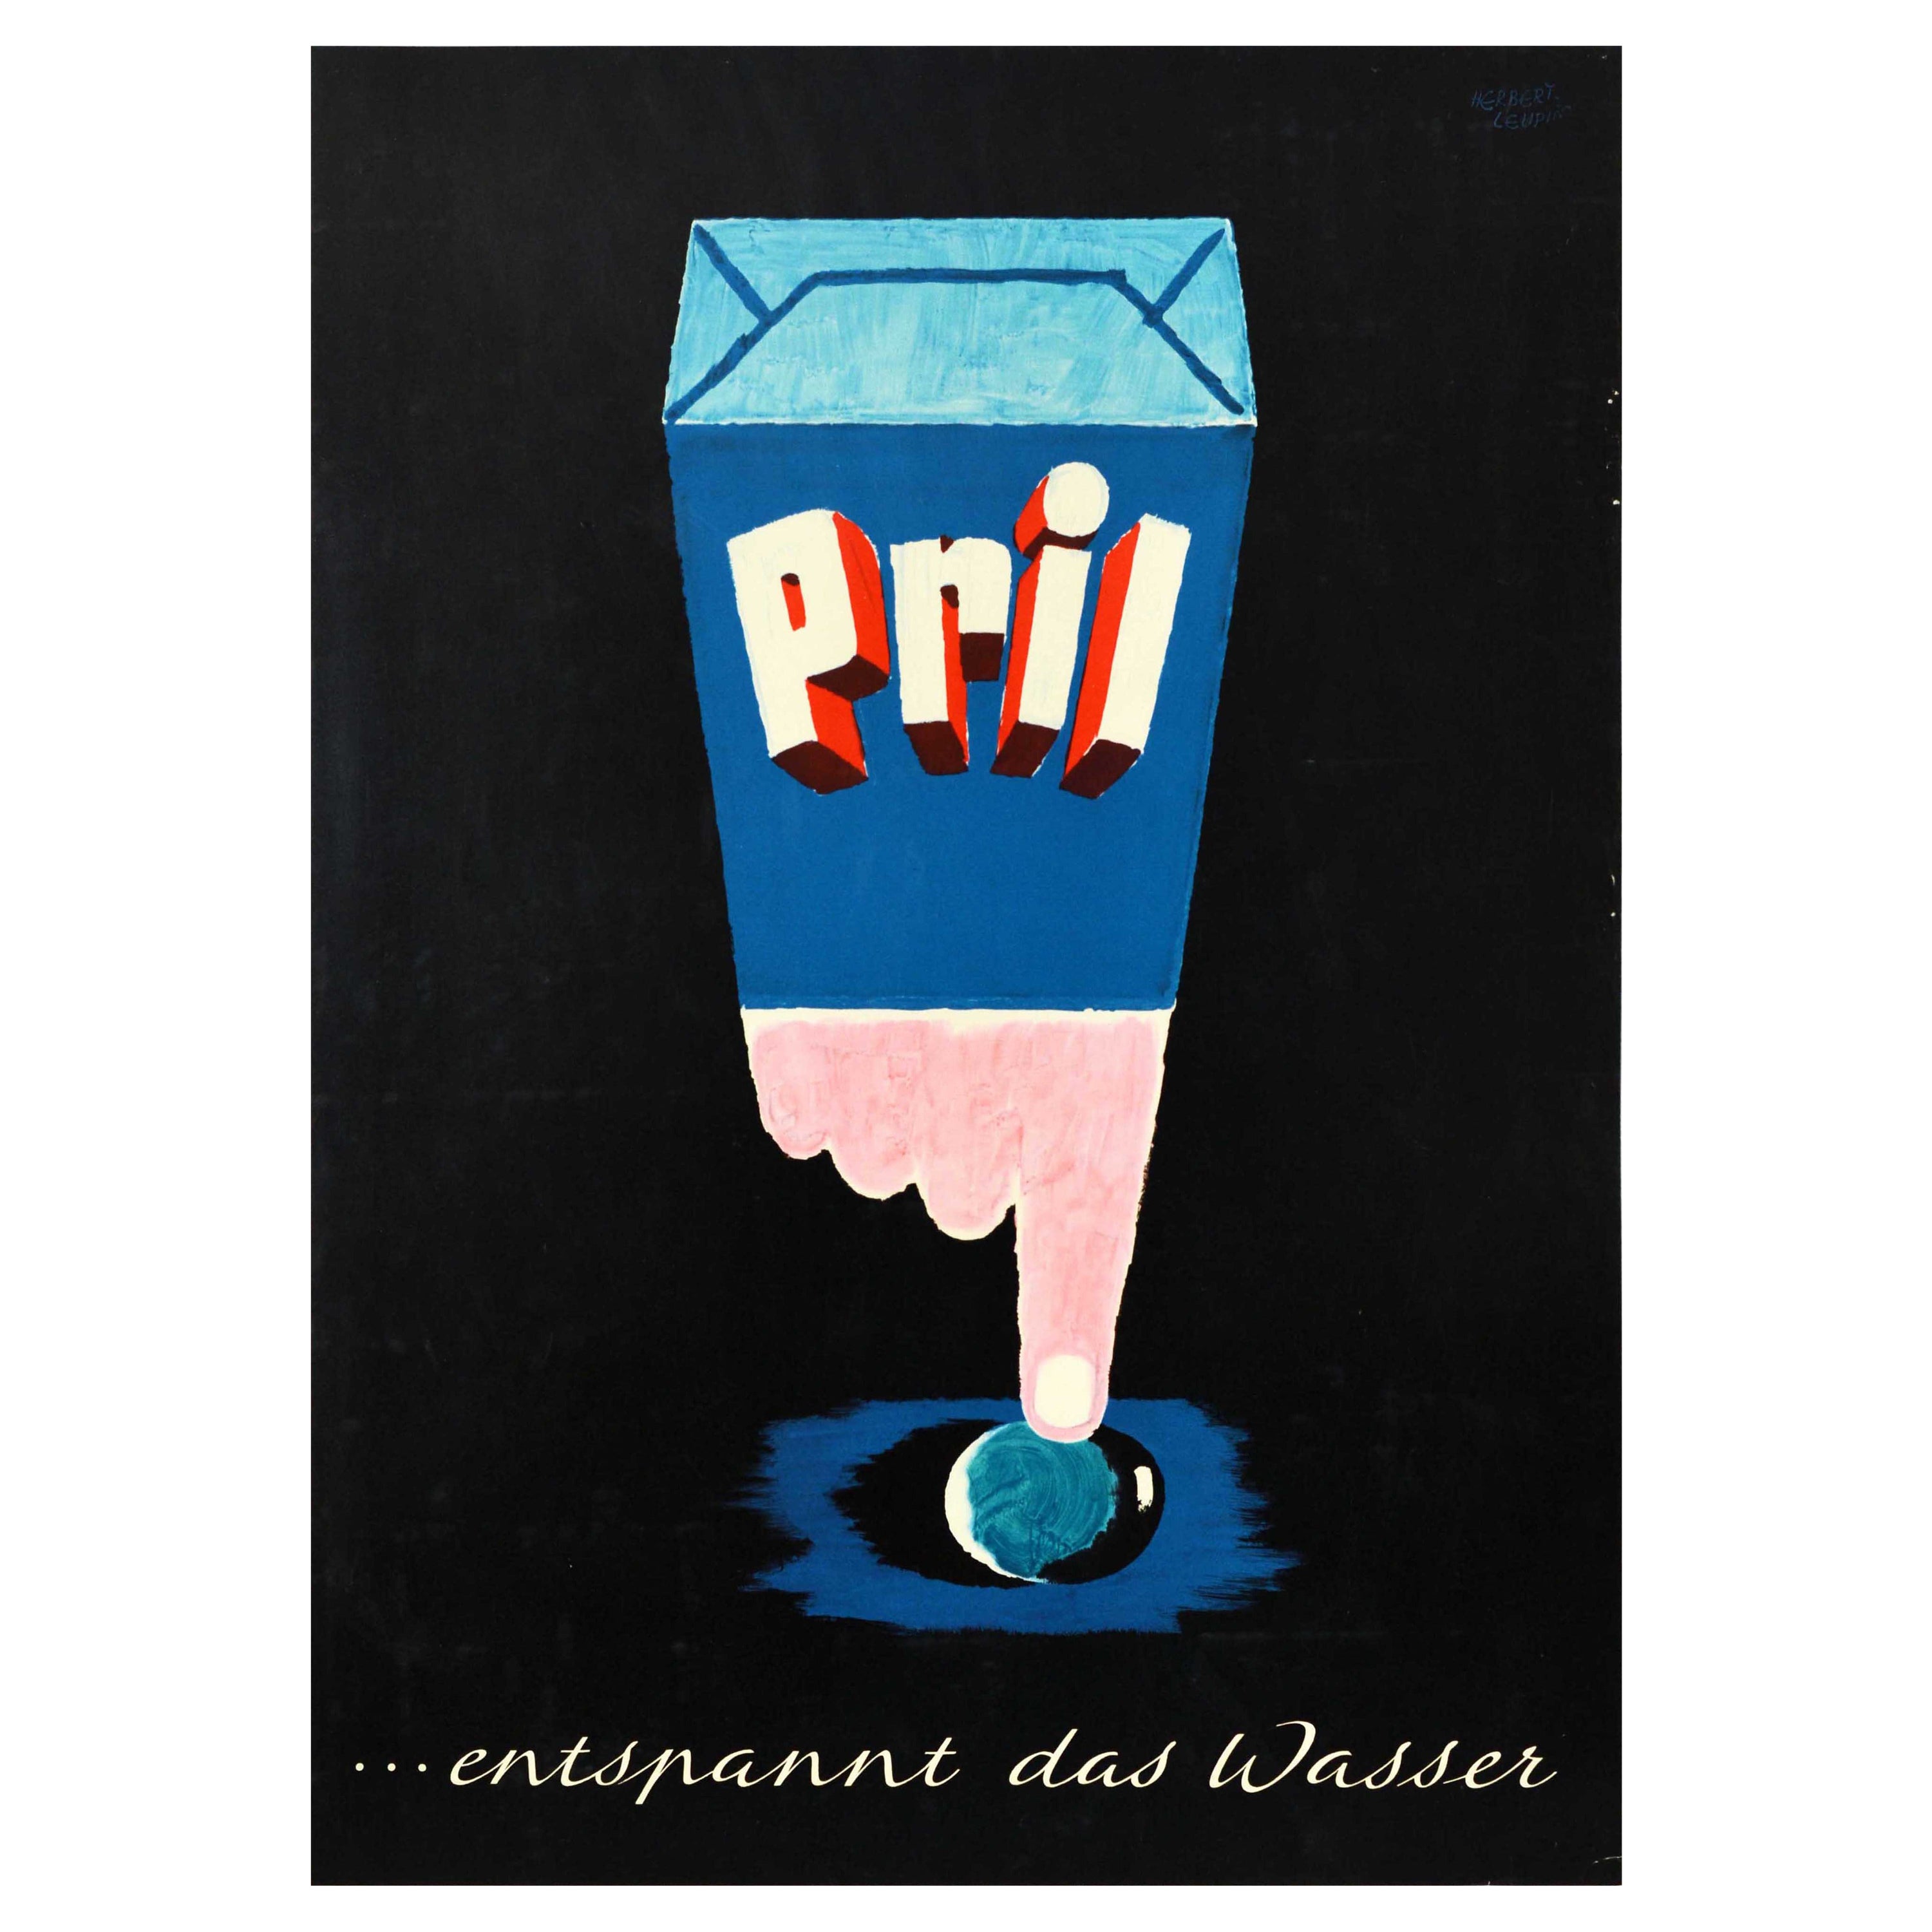 Original Vintage Advertising Poster For Pril Washing Up Powder Relaxes The Water For Sale